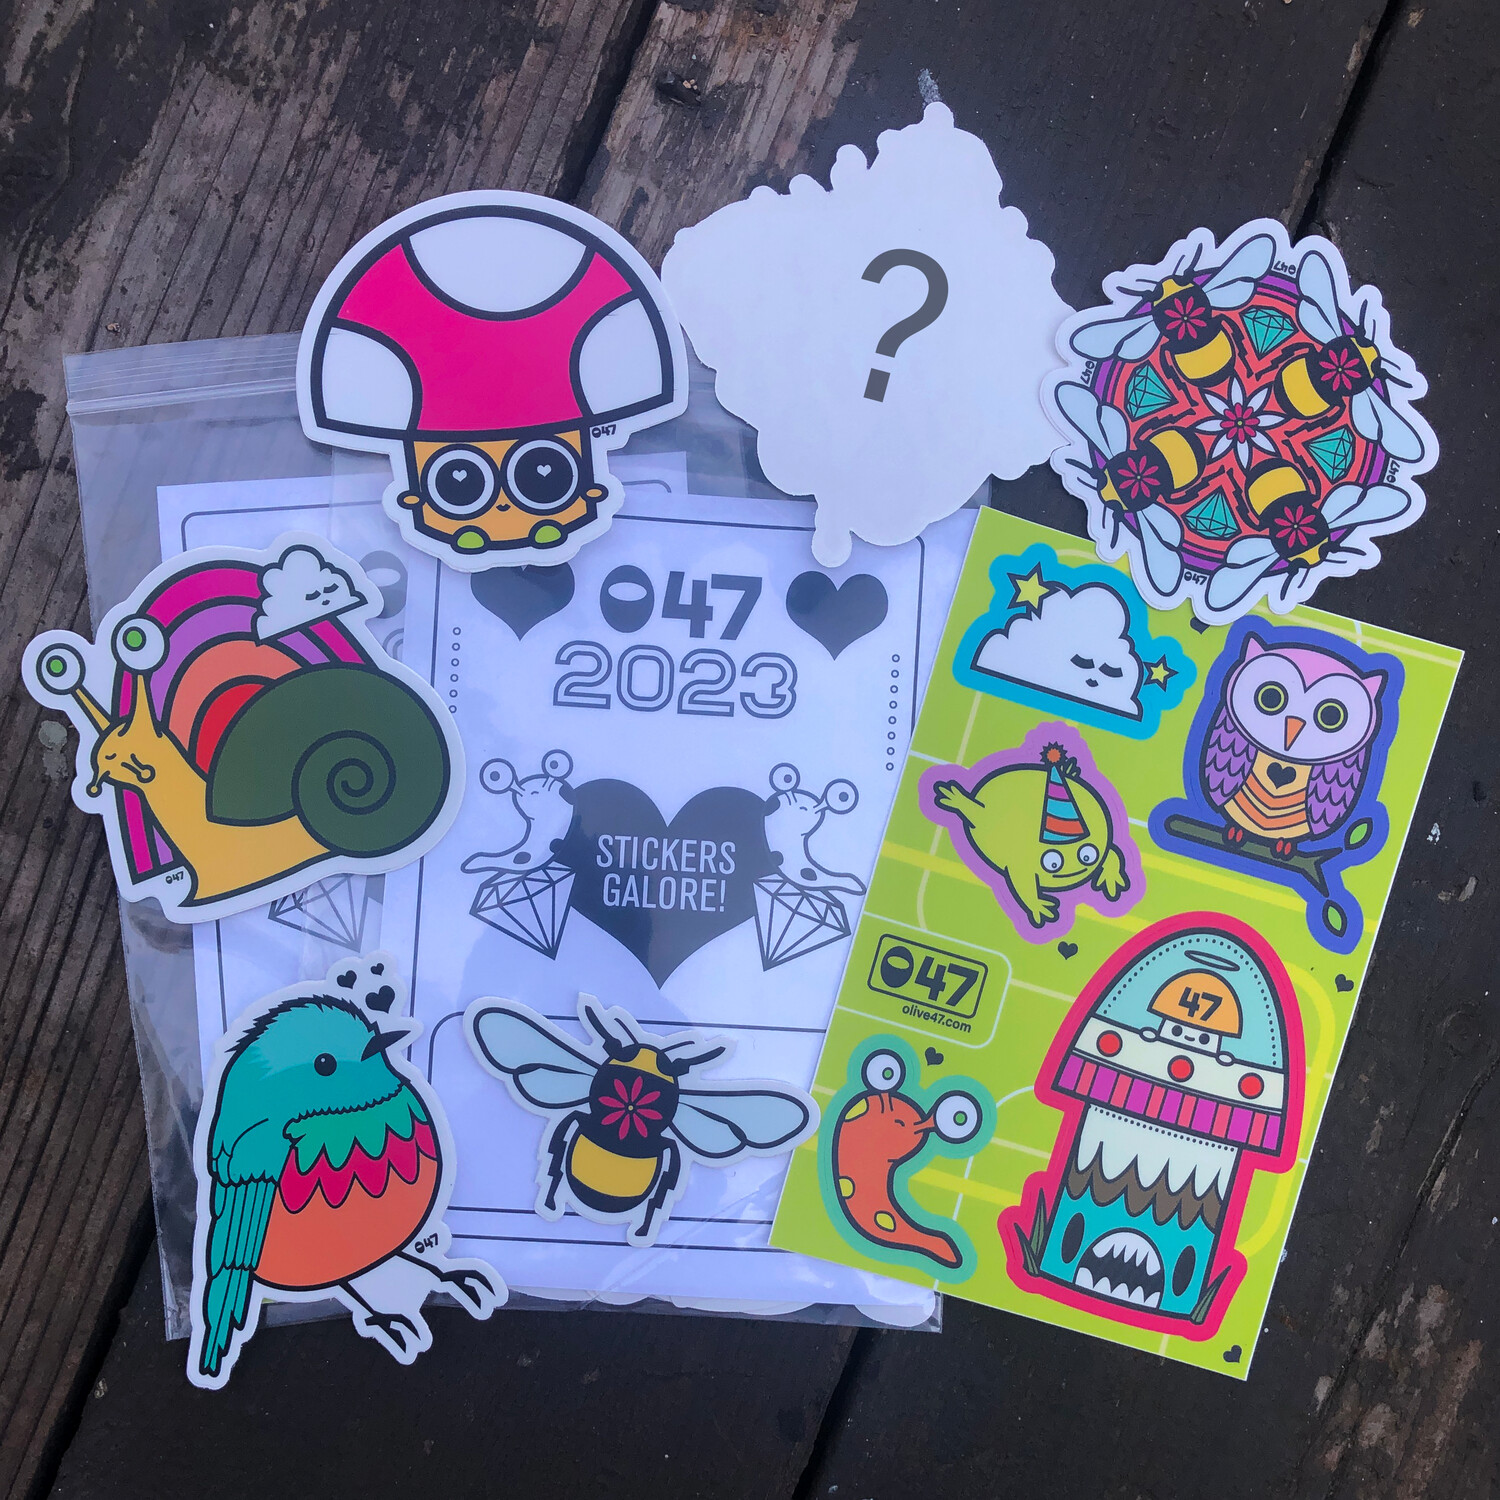 2023 olive47 sticker pack galore!